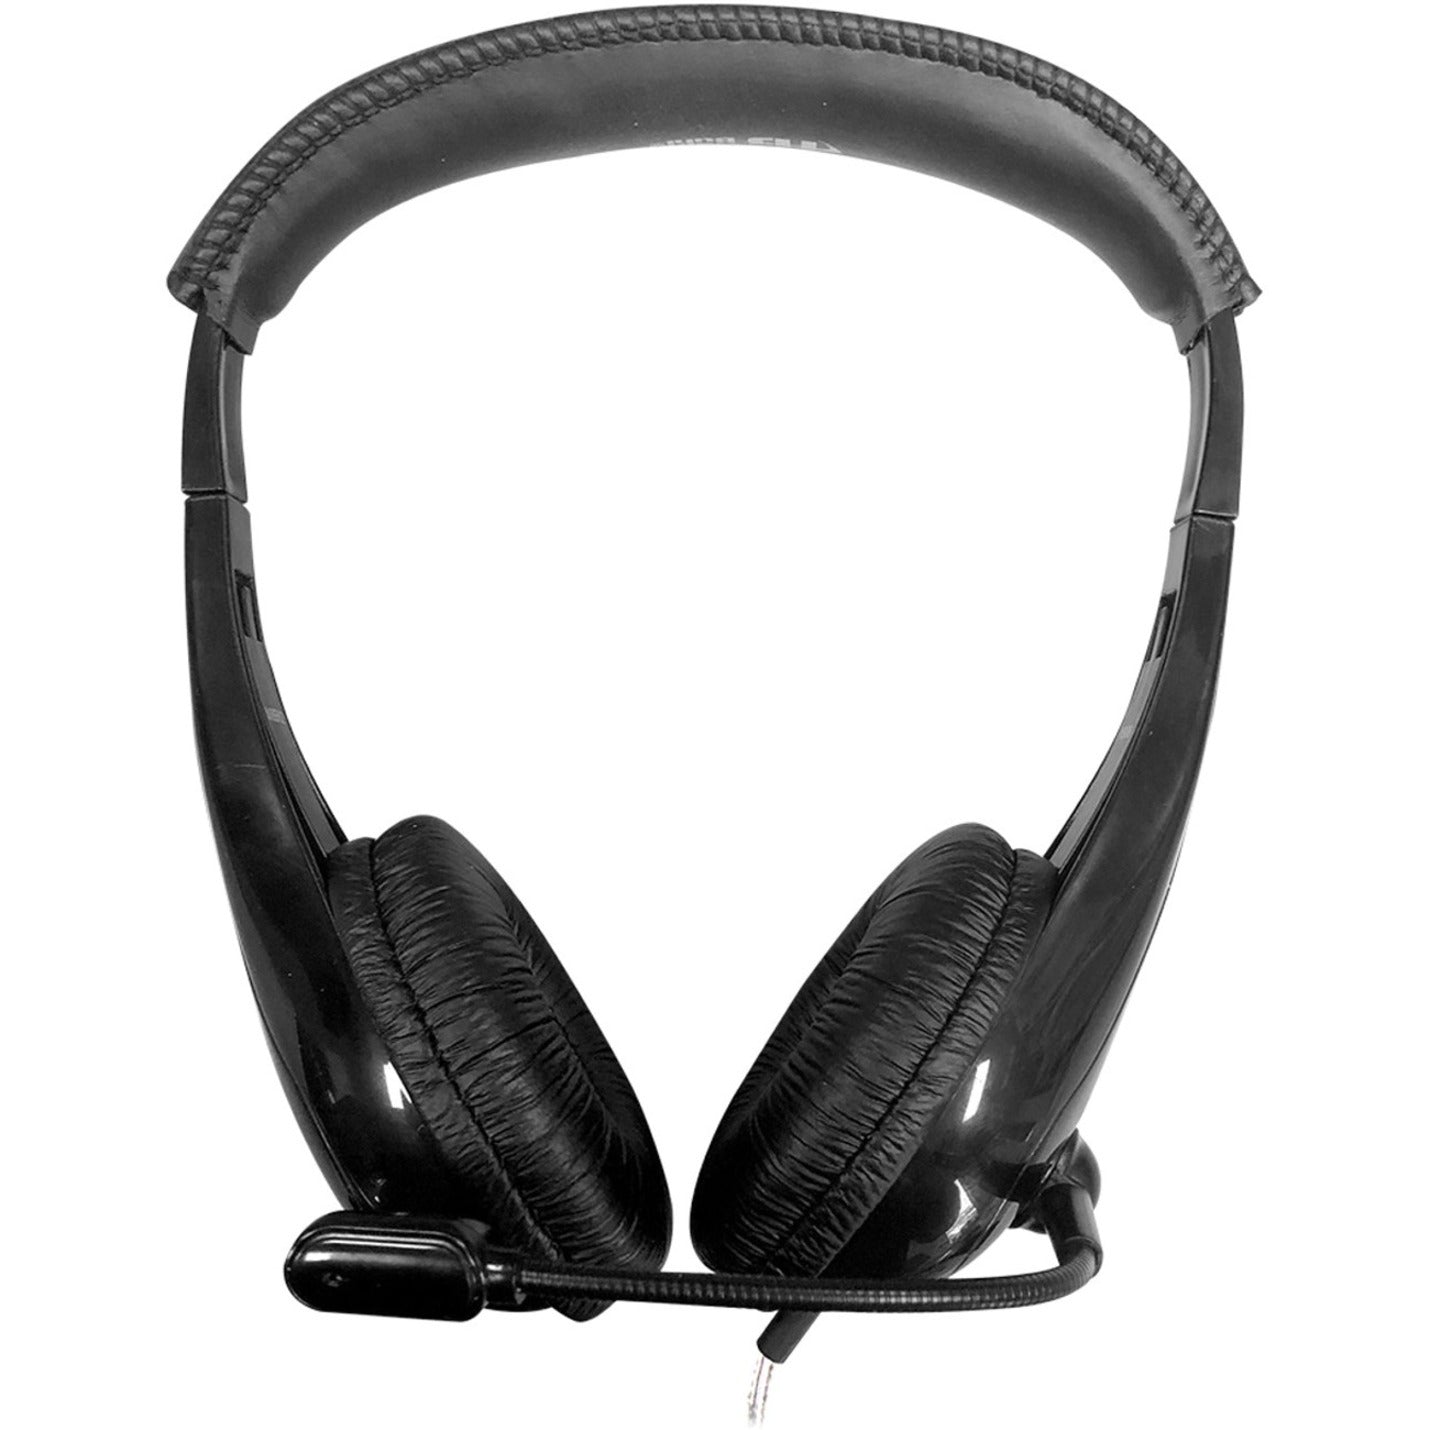 Hamilton Buhl M8BK2 Motiv8 TRRS Classroom Headset with Gooseneck Mic and In-Line Volume Control, Lightweight and Durable